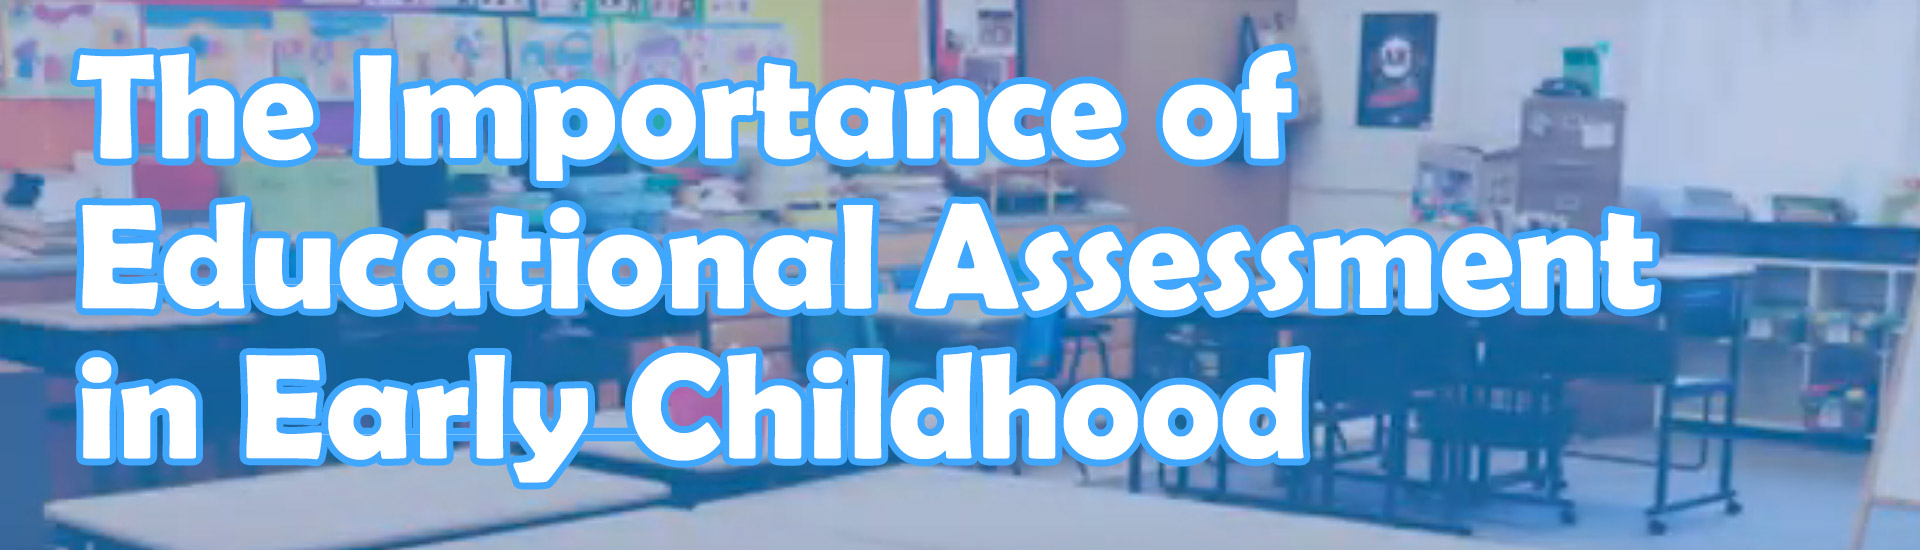 The Importance of Educational Assessment in Early Childhood